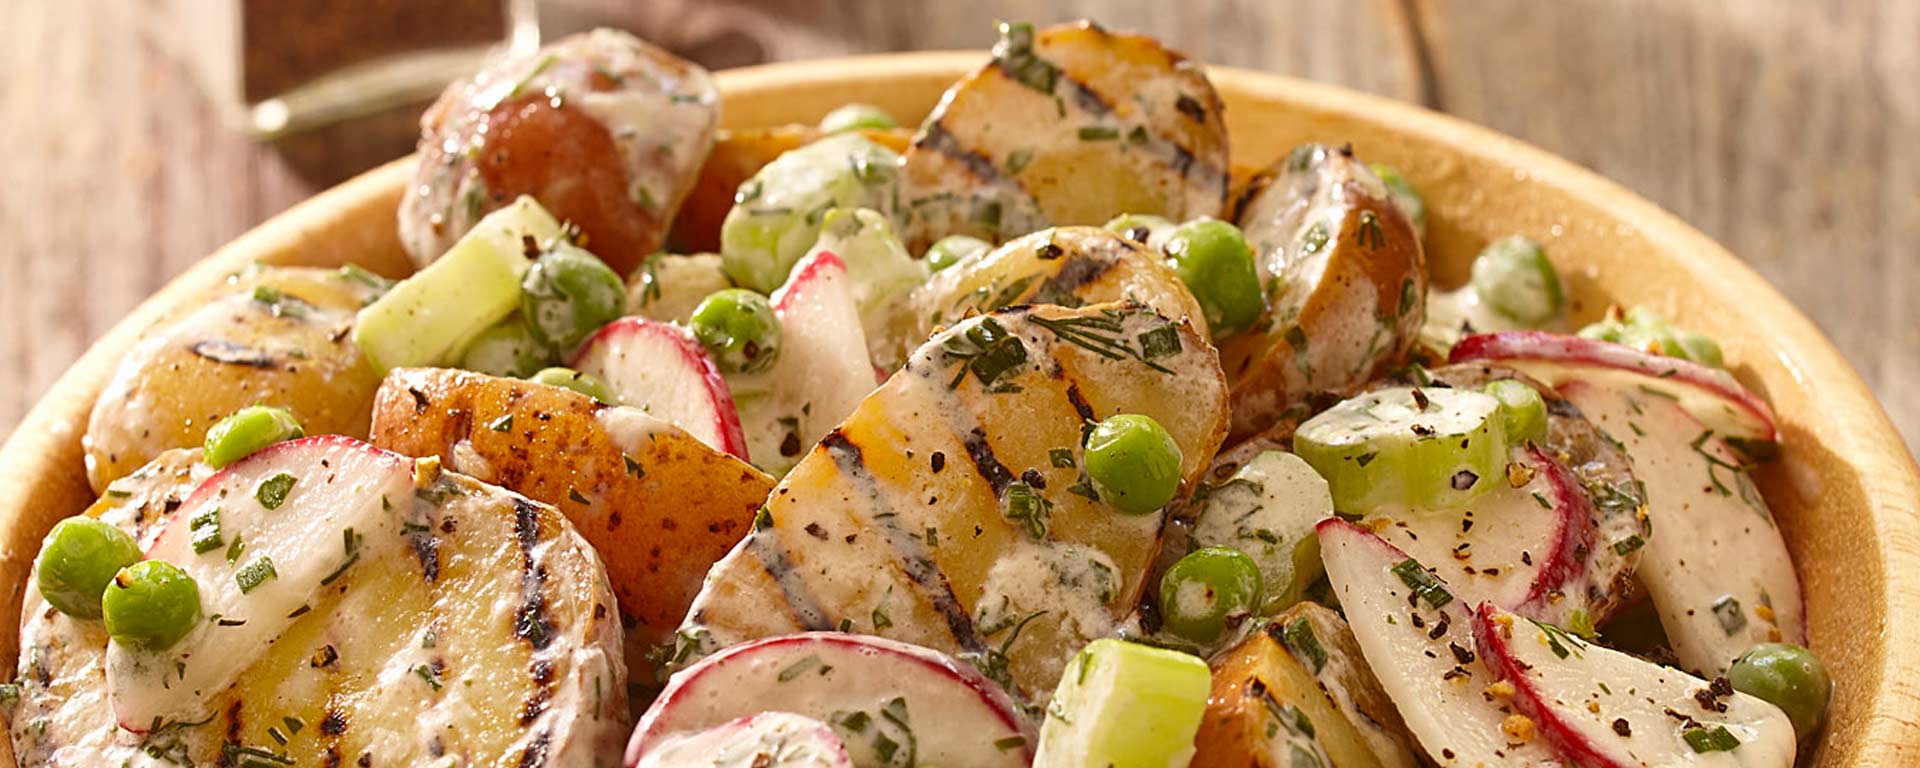 Photo for - Creamy Herb Grilled Potato Salad